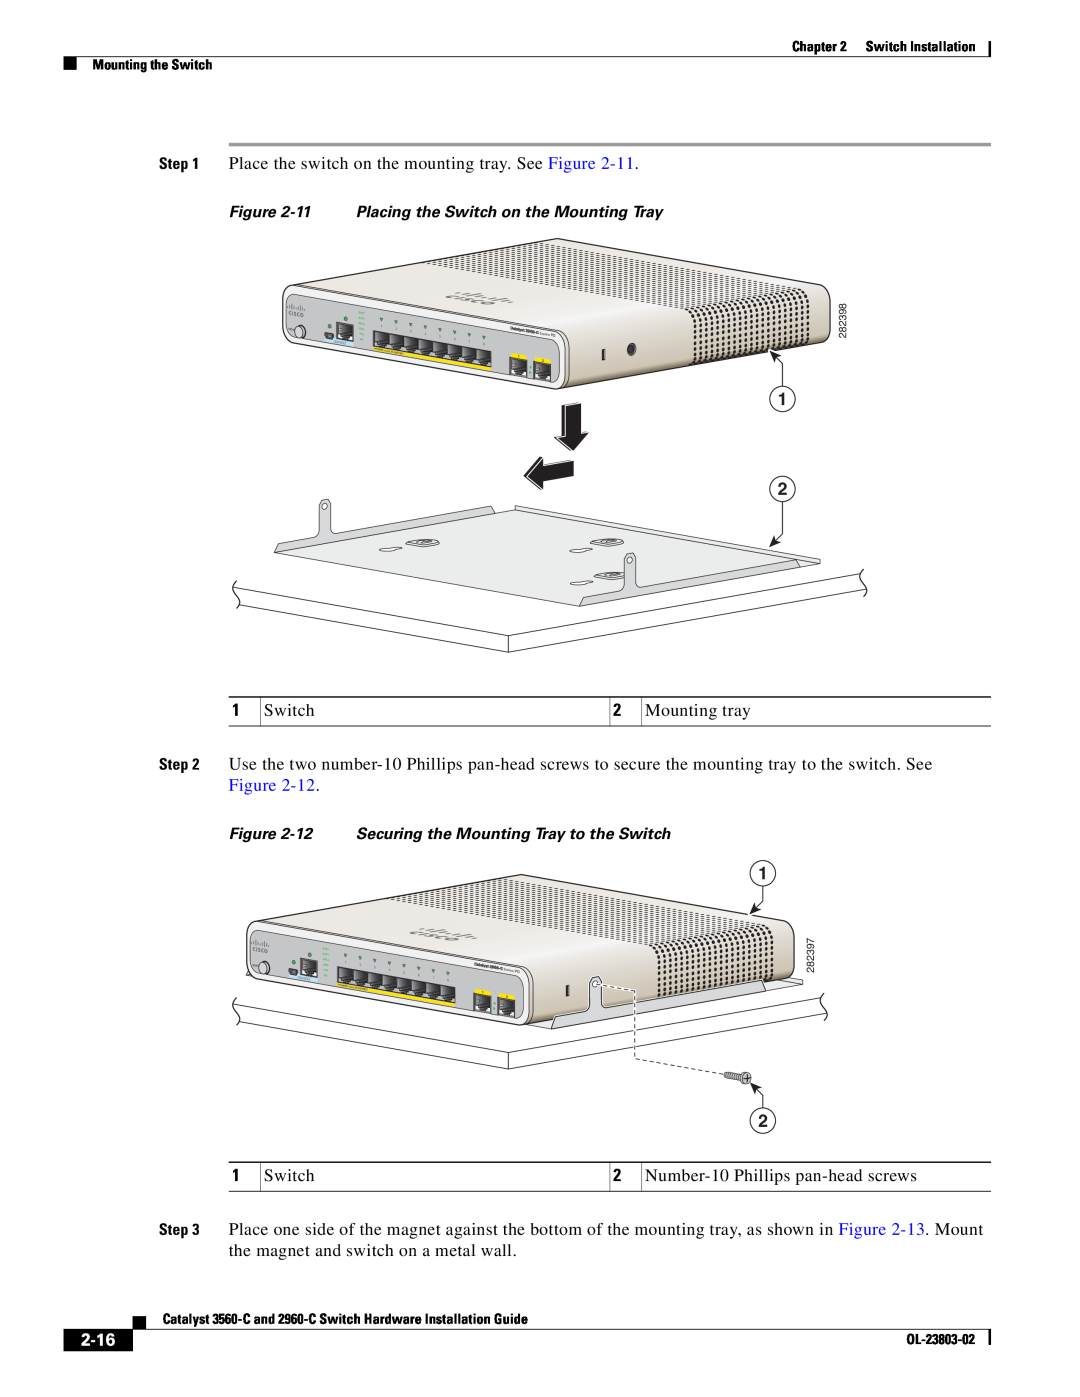 Cisco Systems 3560-C manual 2-16, 11 Placing the Switch on the Mounting Tray, 12 Securing the Mounting Tray to the Switch 